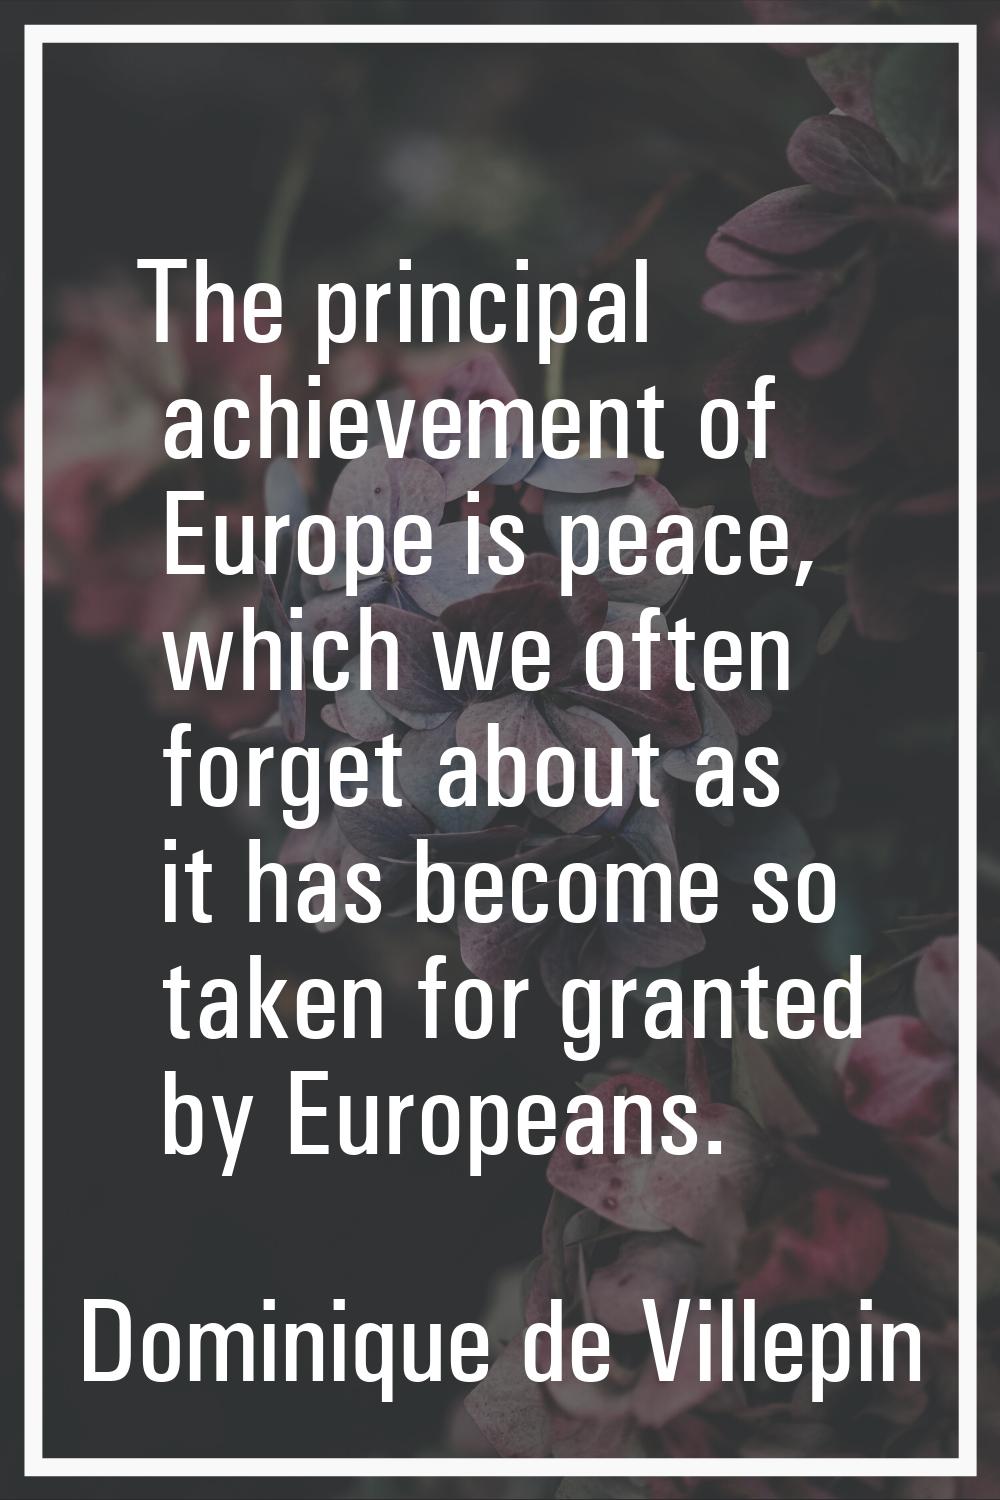 The principal achievement of Europe is peace, which we often forget about as it has become so taken